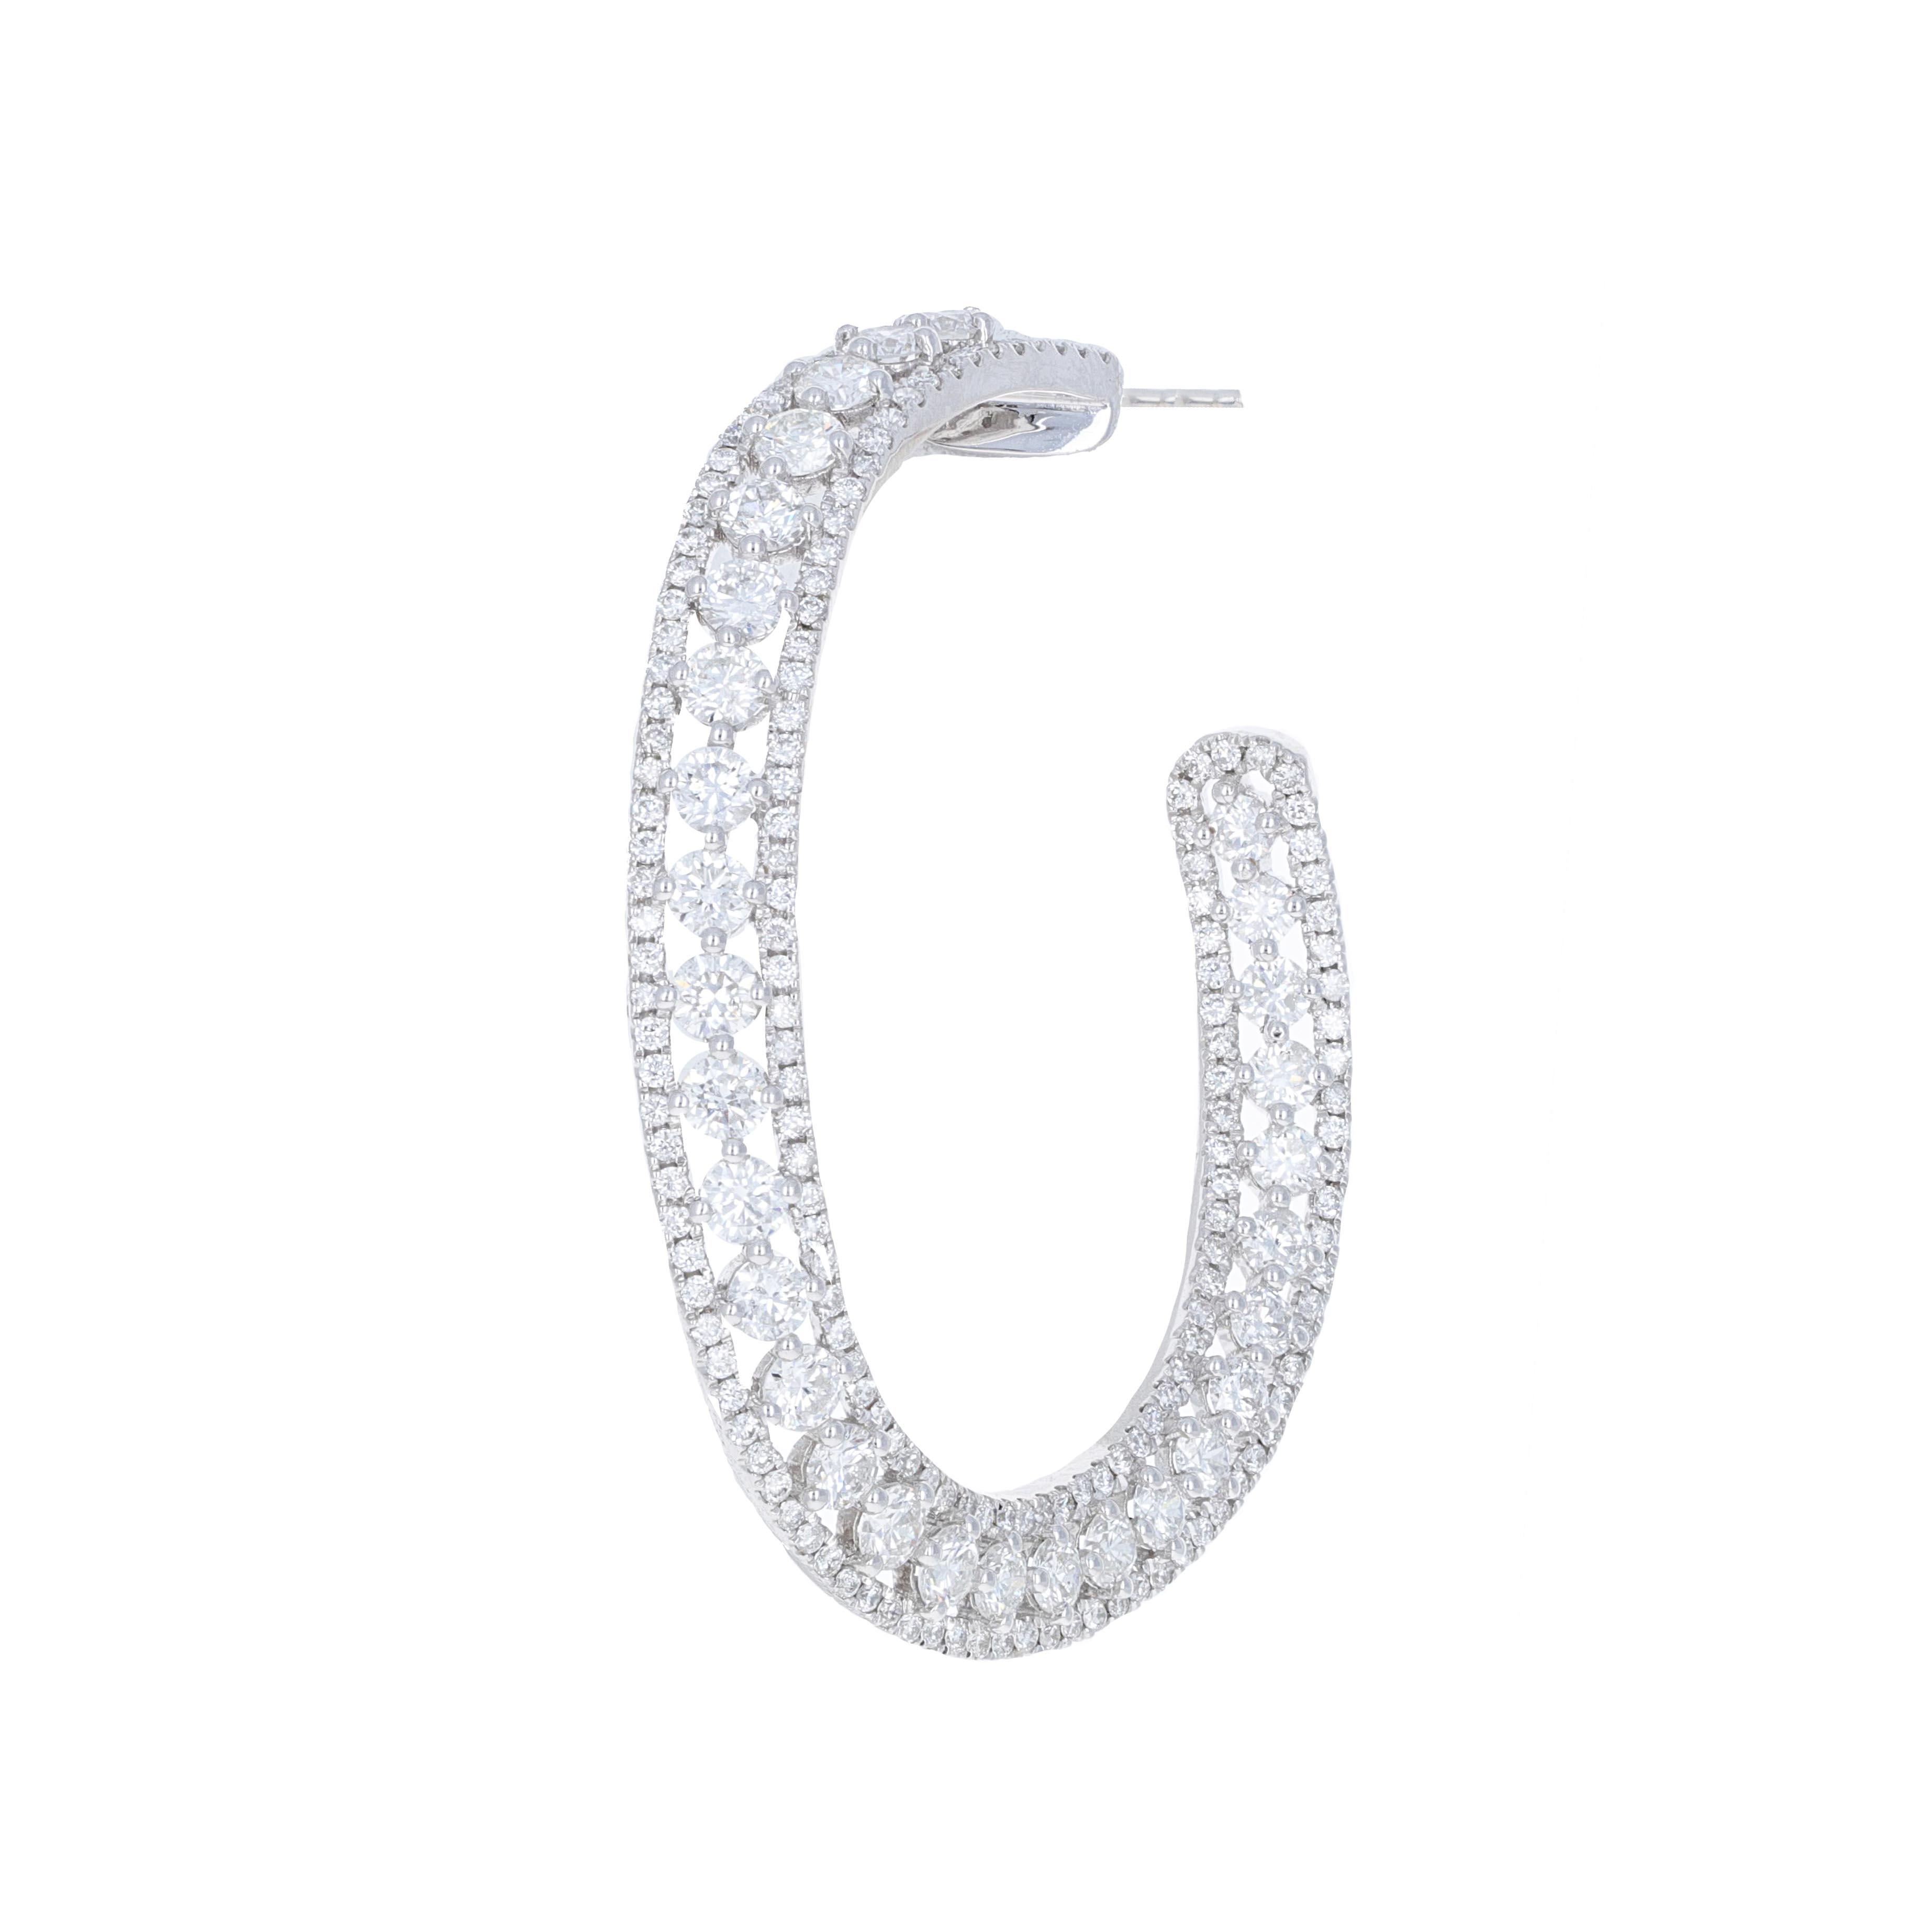 18 karat white gold diamond hoop earrings. These hoops have 7.72 carats of round brilliant white diamonds. The design of the hoops is modern and chic. You can dress these hoops up or down and have them as an everyday pair of earrings. They are a